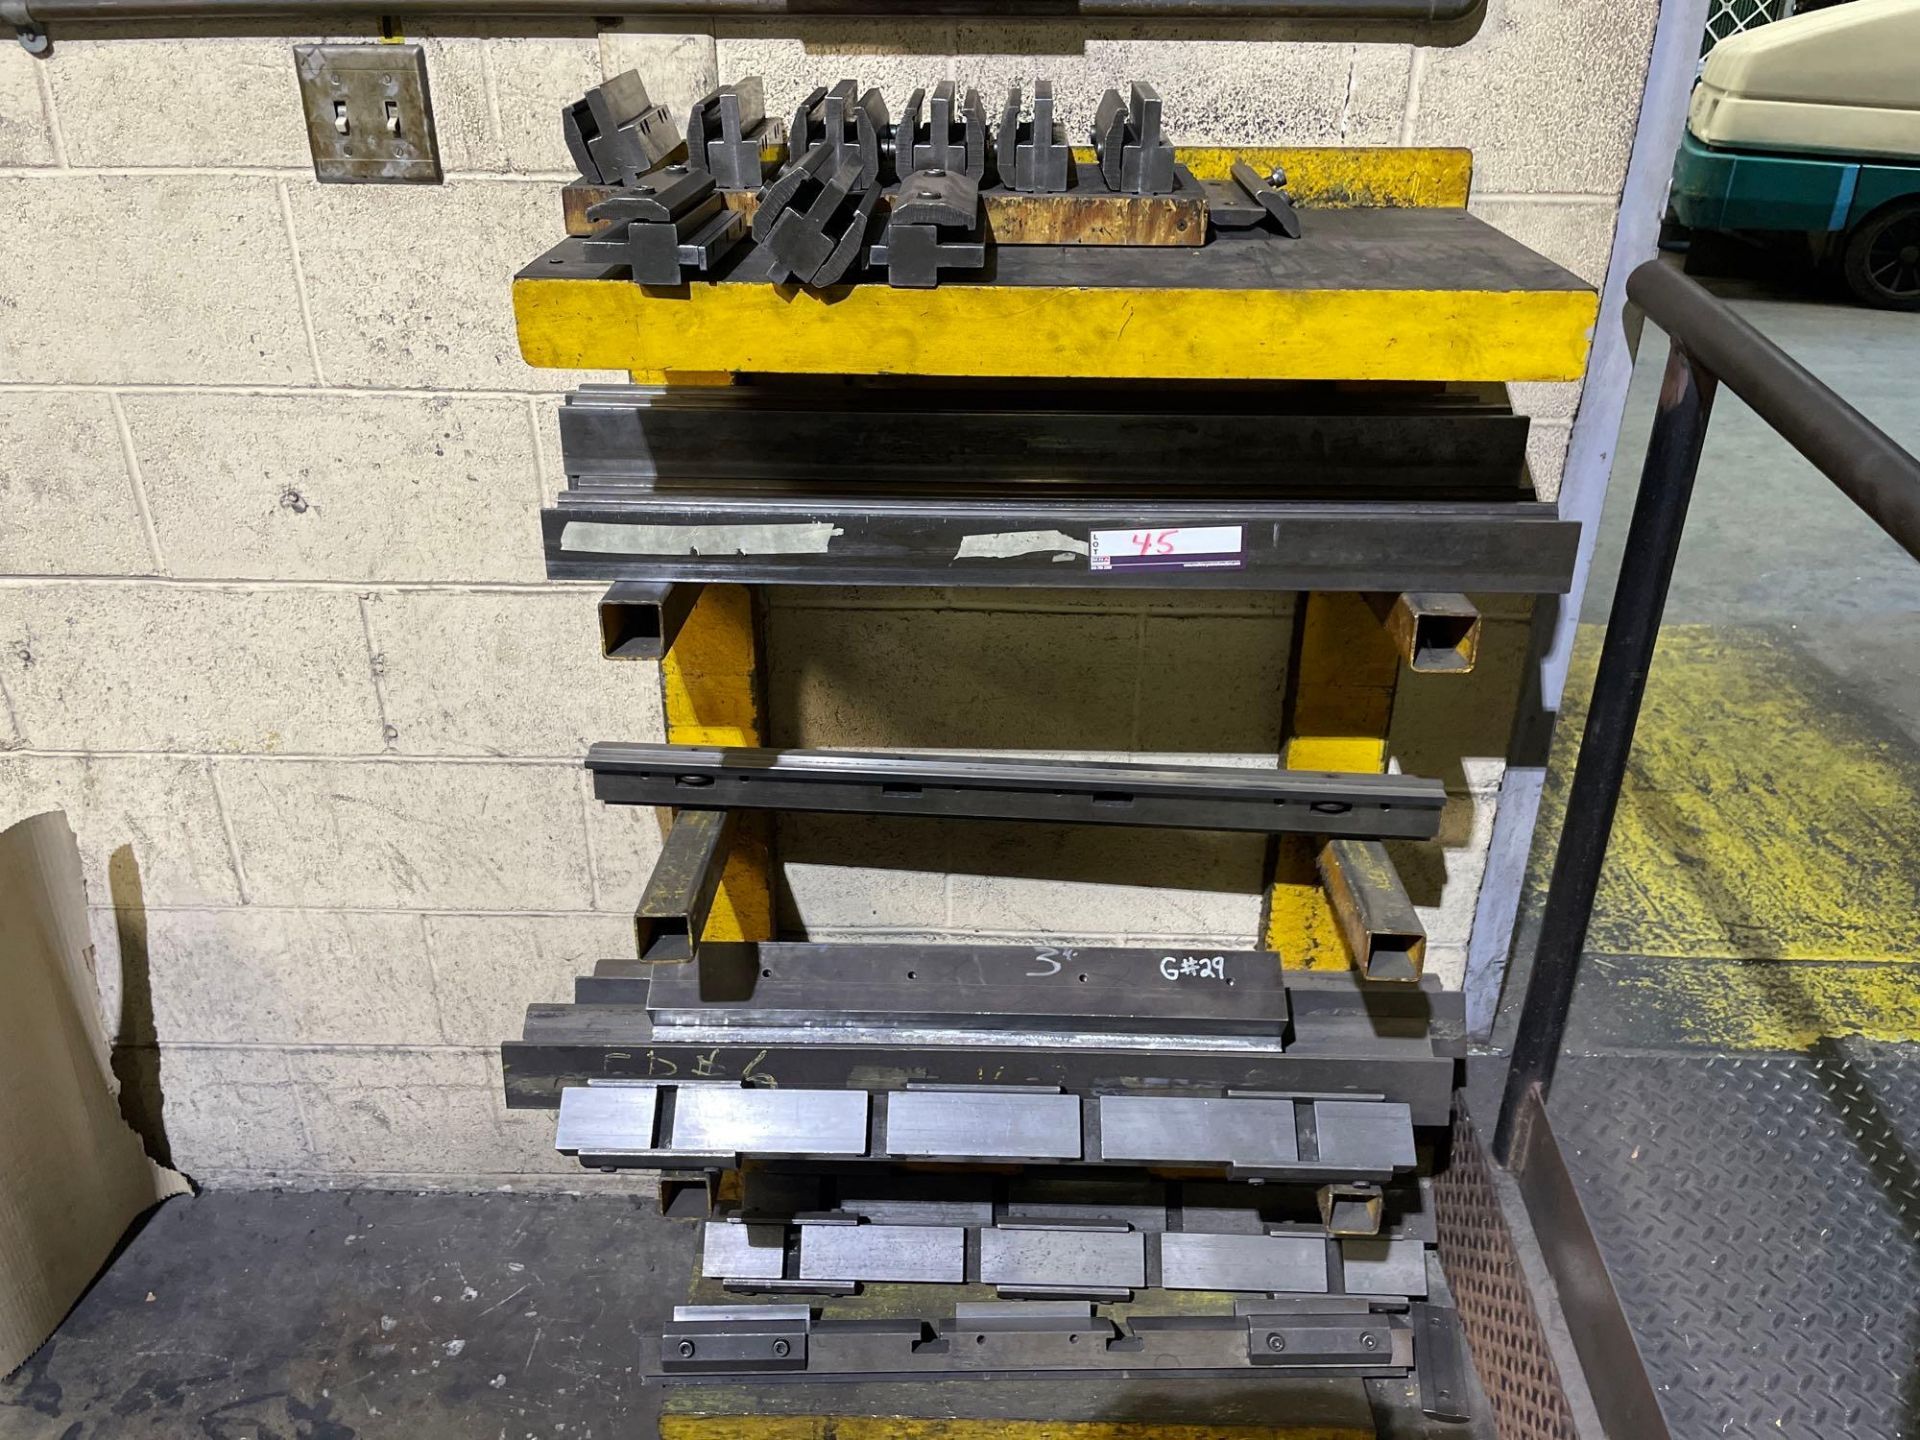 Assorted Dies for Press Brakes with Rack